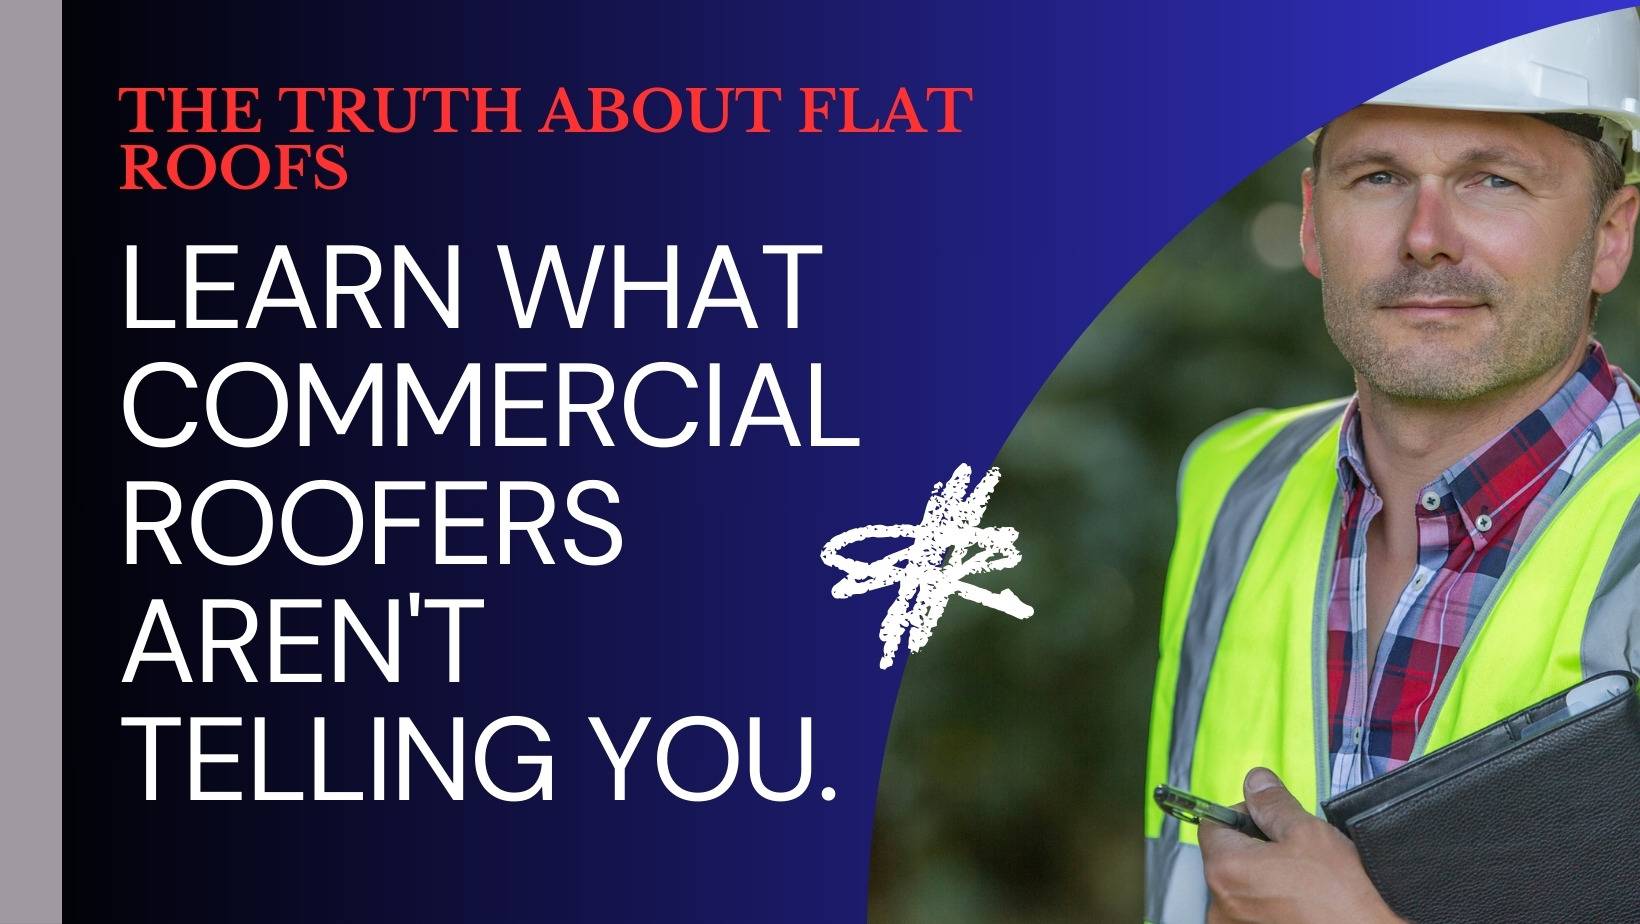 Expert Commercial Roofers Unveil the Truth About Flat Roof Repairs